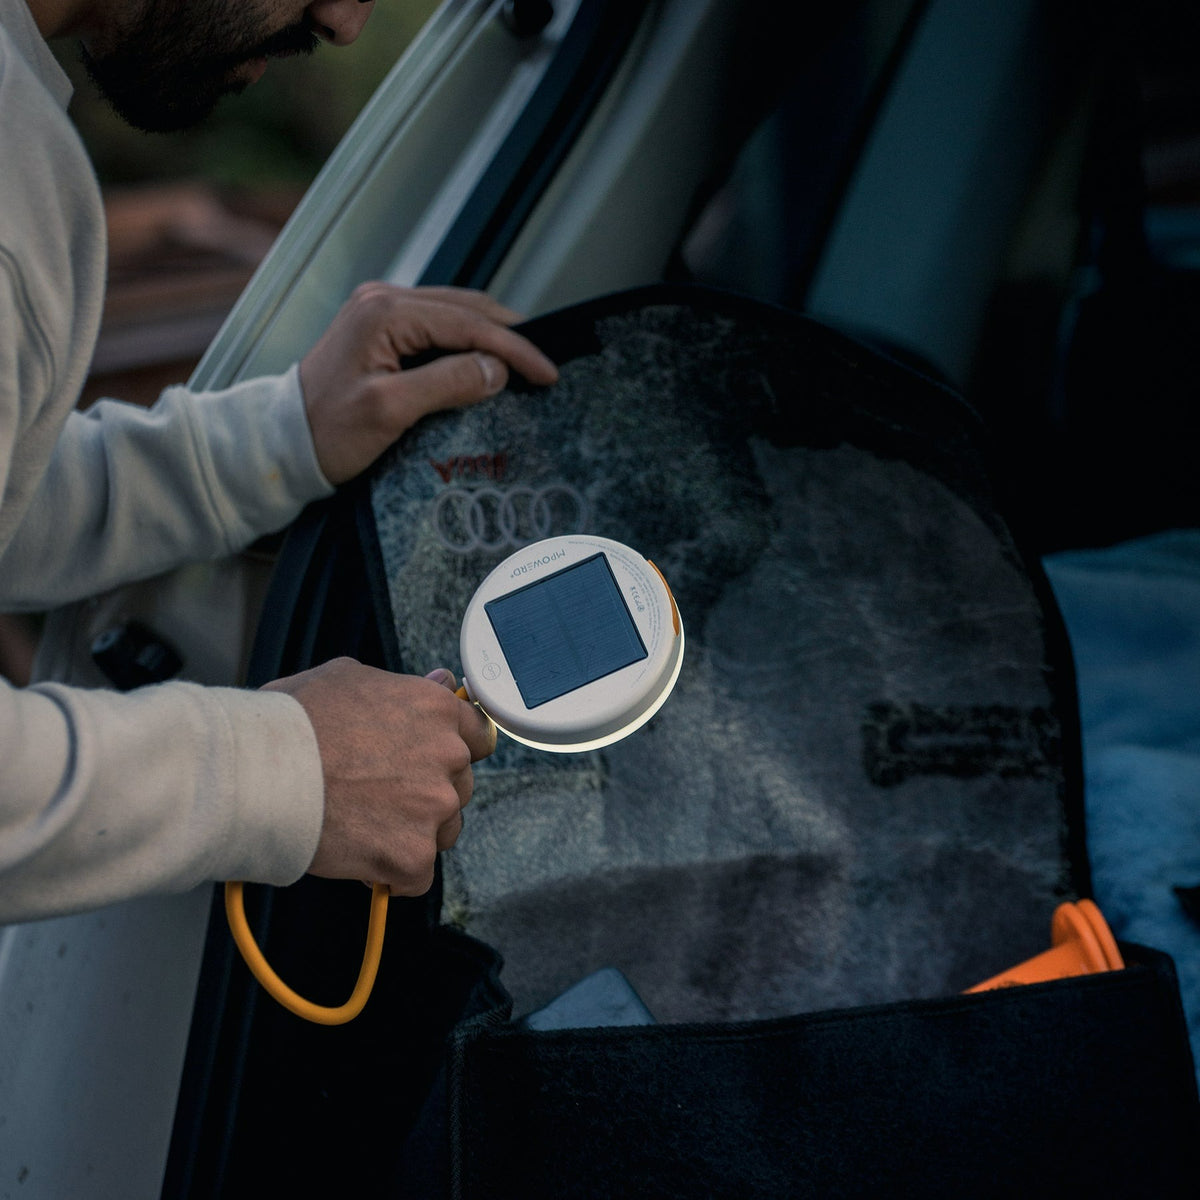 Luci Core Utility Solar Light shining in a bag